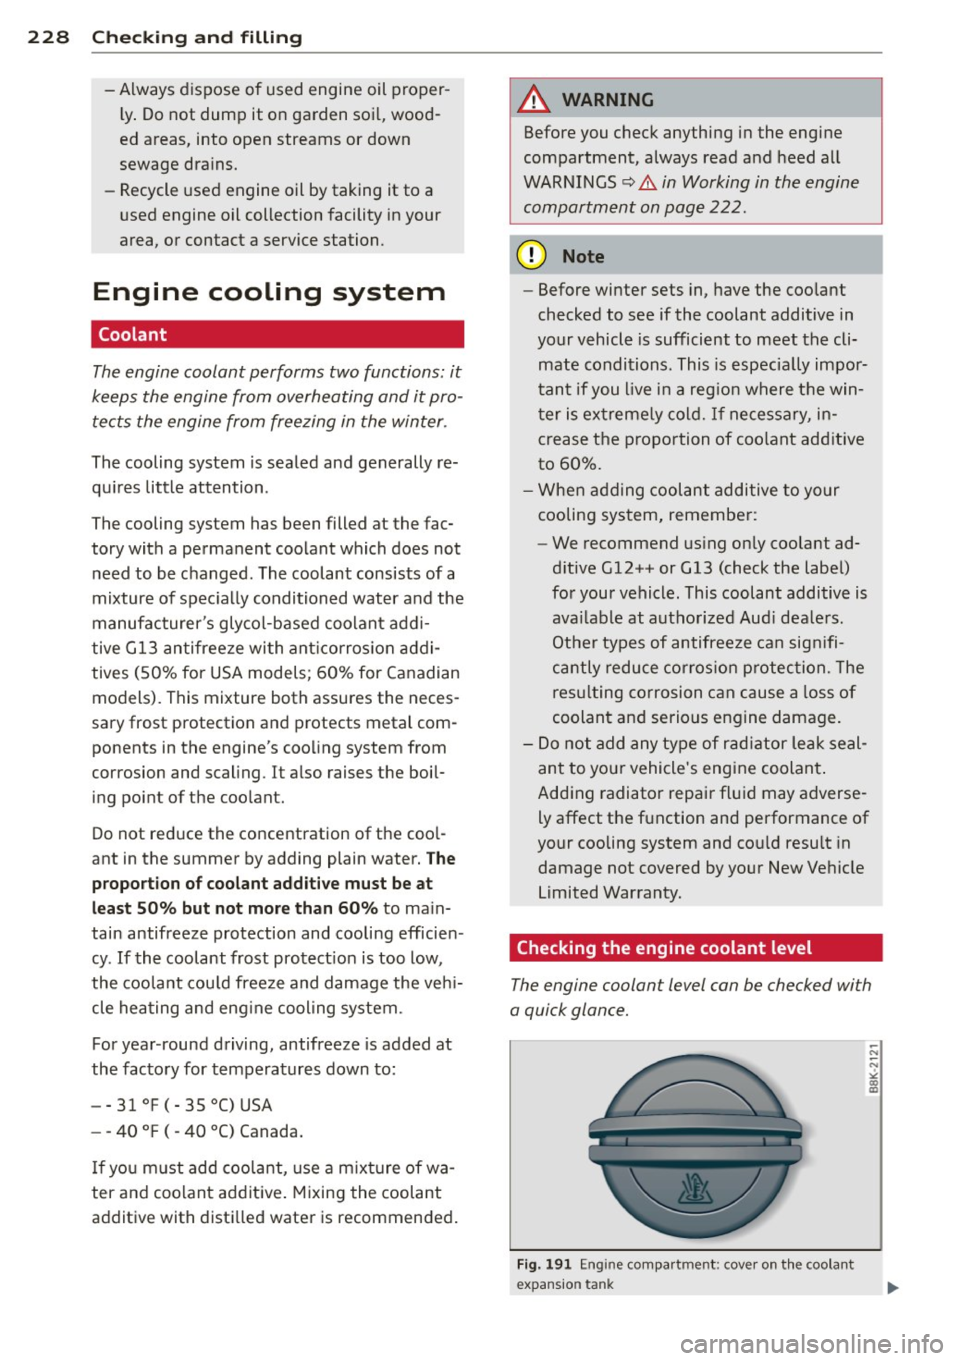 AUDI A6 2015  Owners Manual 228  Check ing  and  filling 
- Always dispose  of  used  engine  oil  proper ­
l y .  Do not  dump  it on  garden  soi l, wood­
ed  areas,  into  open  streams  or  down 
sewage  dra ins. 
- Recycl